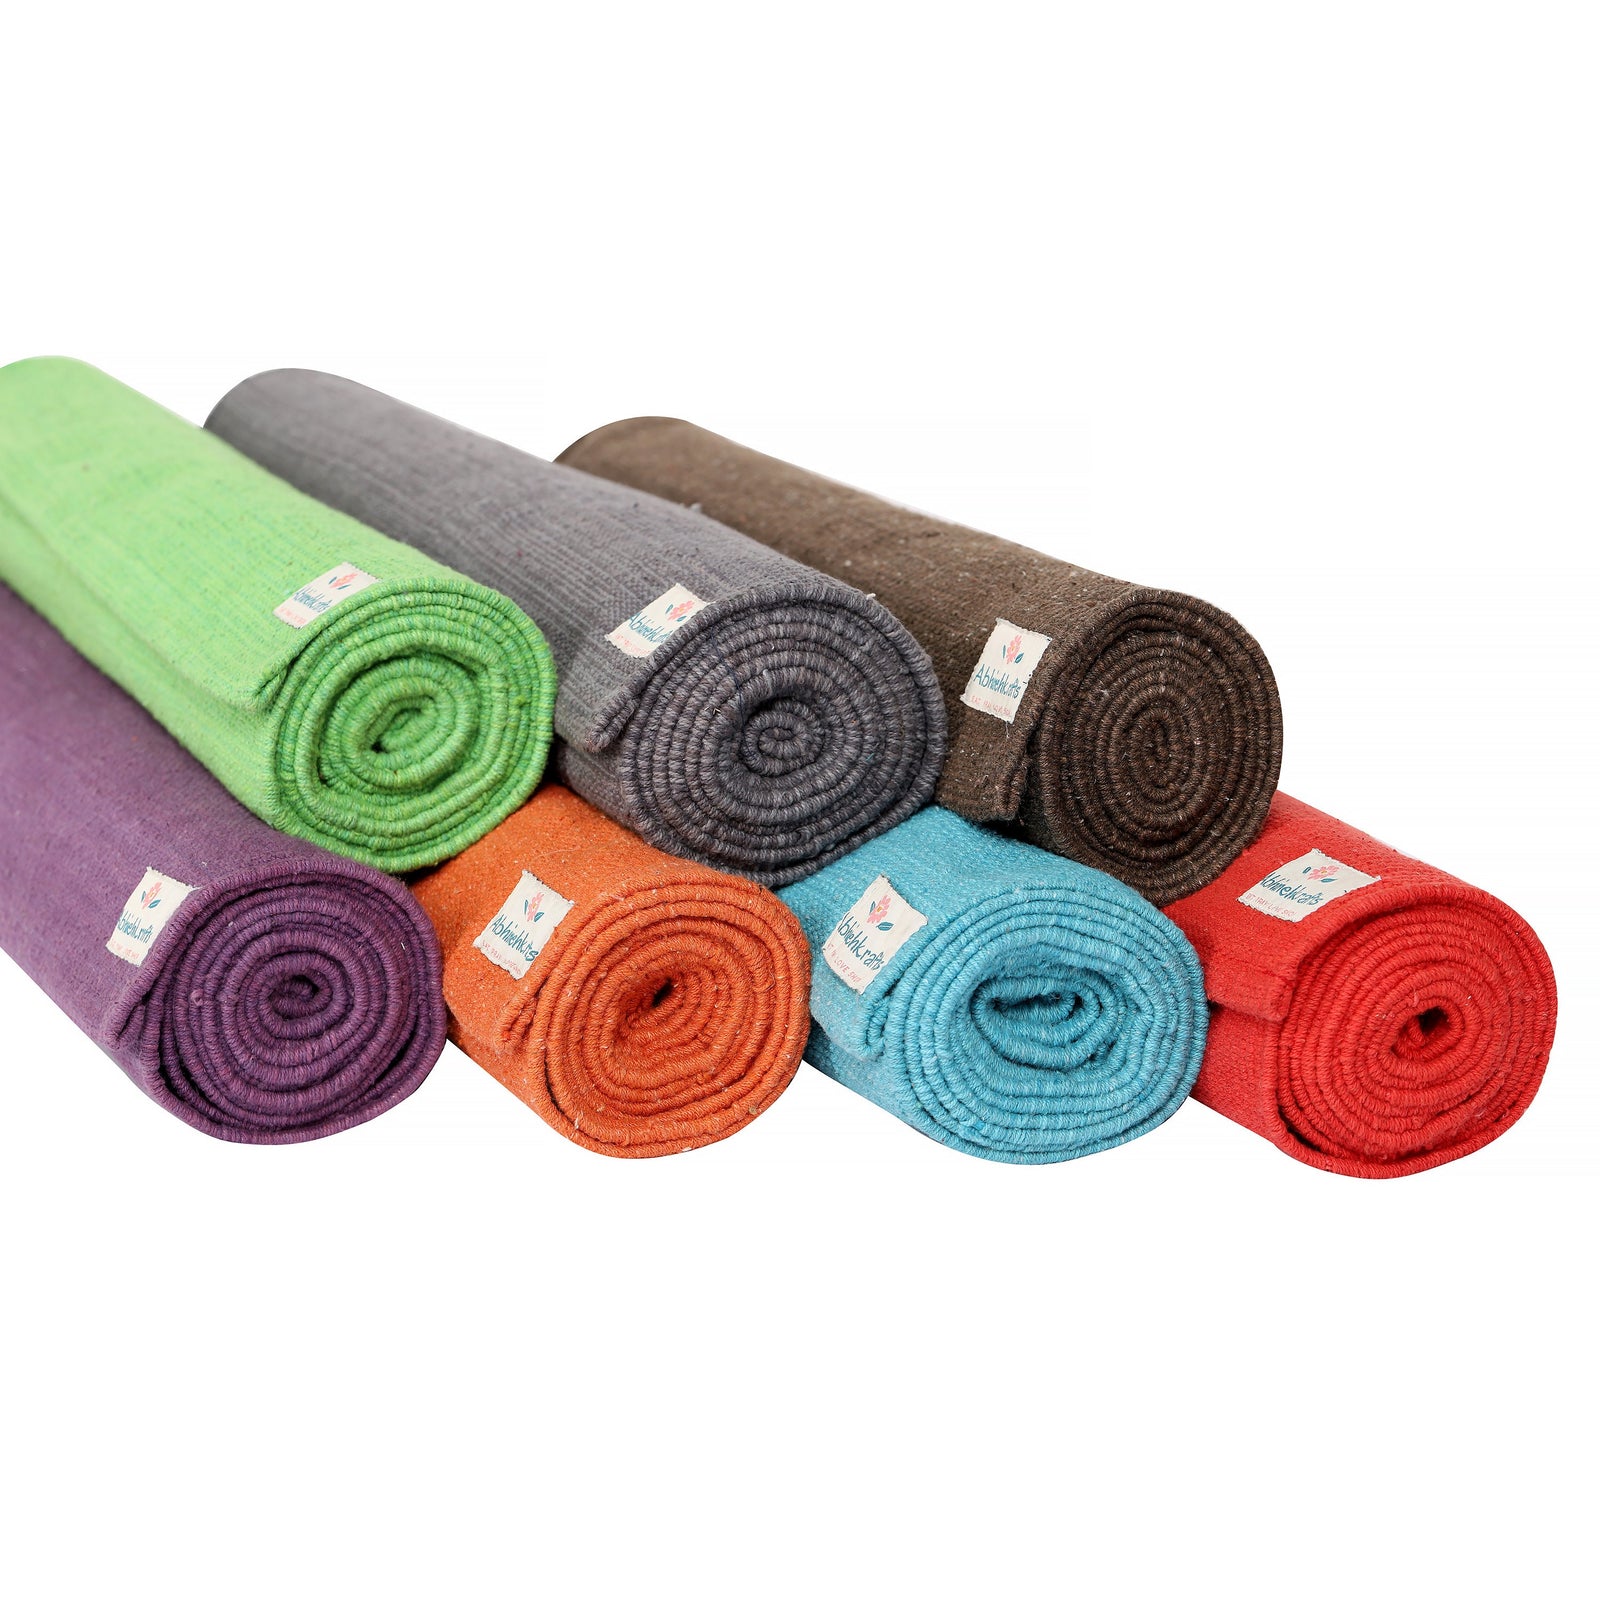 Organic Cotton Mat for Yoga, Pilates, Fitness, and Meditation - Natural  Color with Antiskid Back layer - 3mm to 4mm thickness, Mats -  Canada